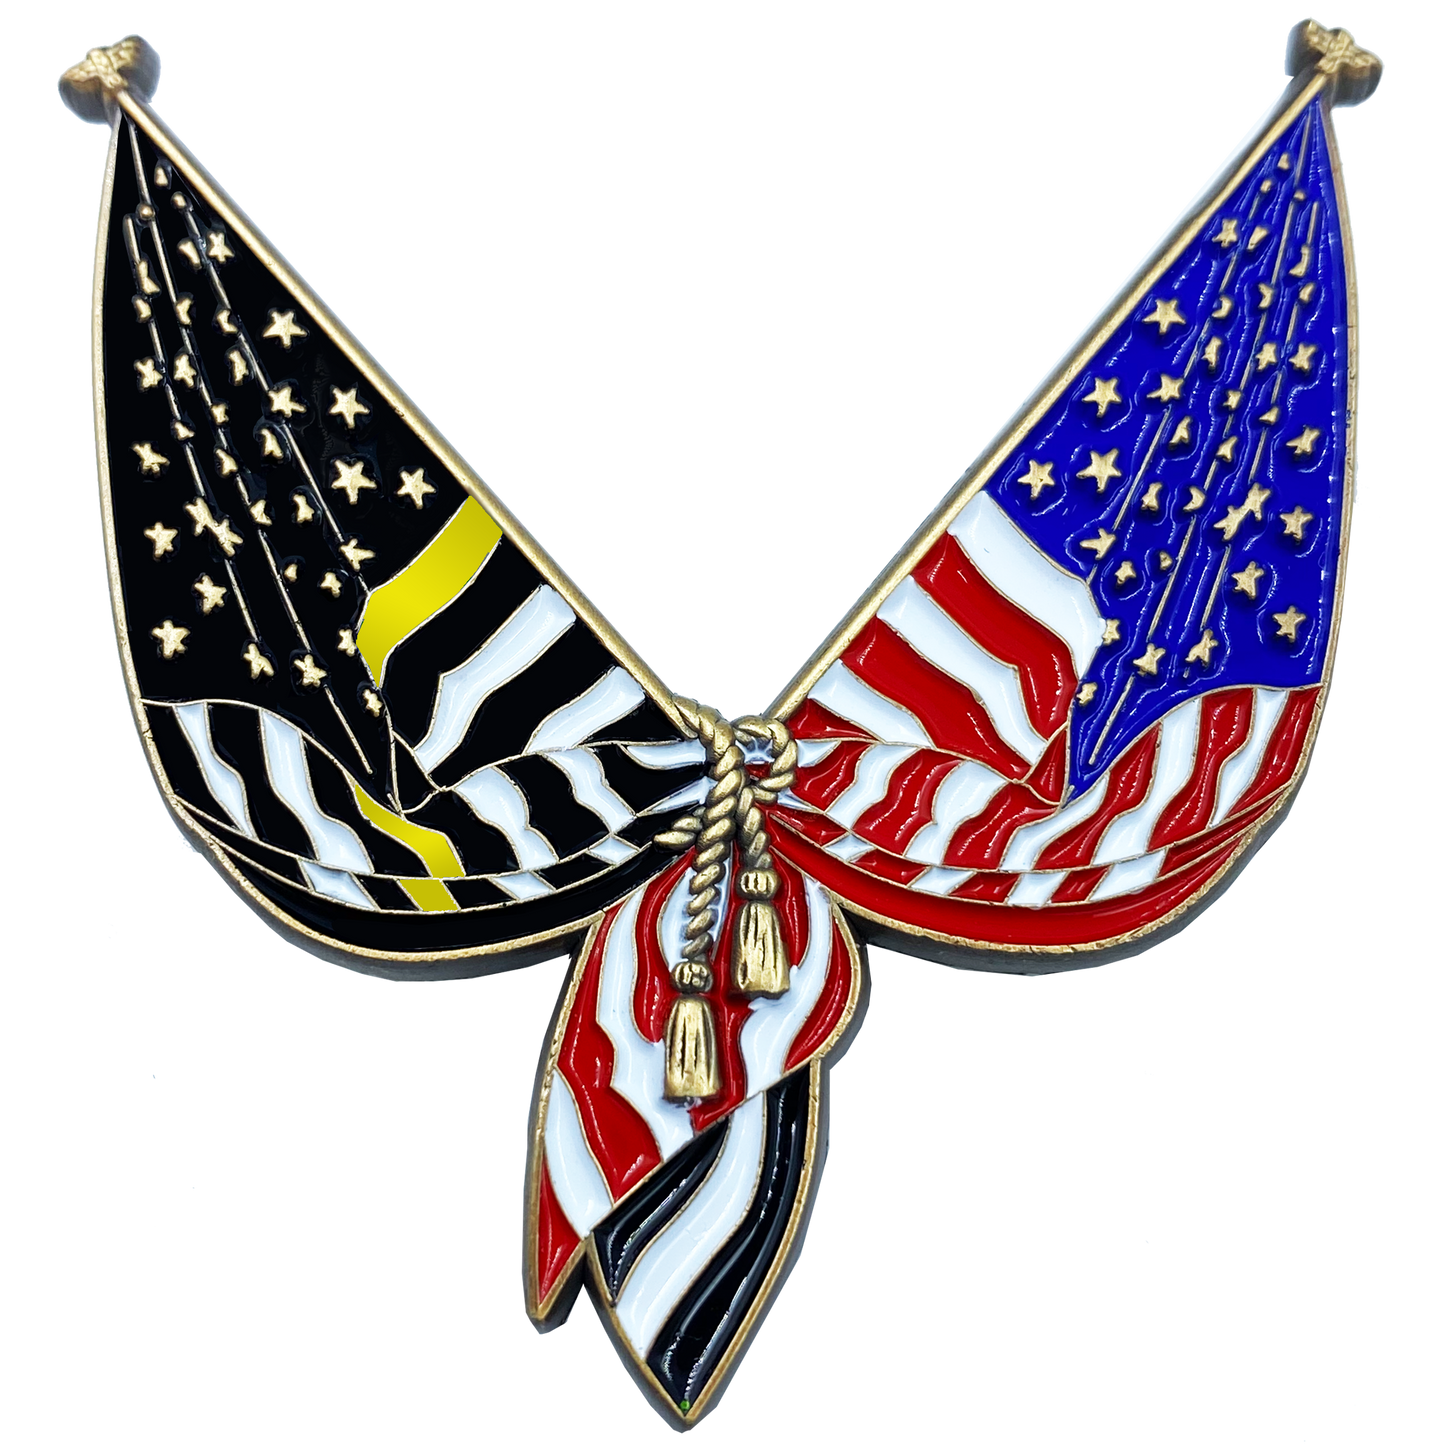 DL10-02 Thin Gold Line Flag Pin 2 inch with dual pin posts 911 Emergency Dispatched yellow